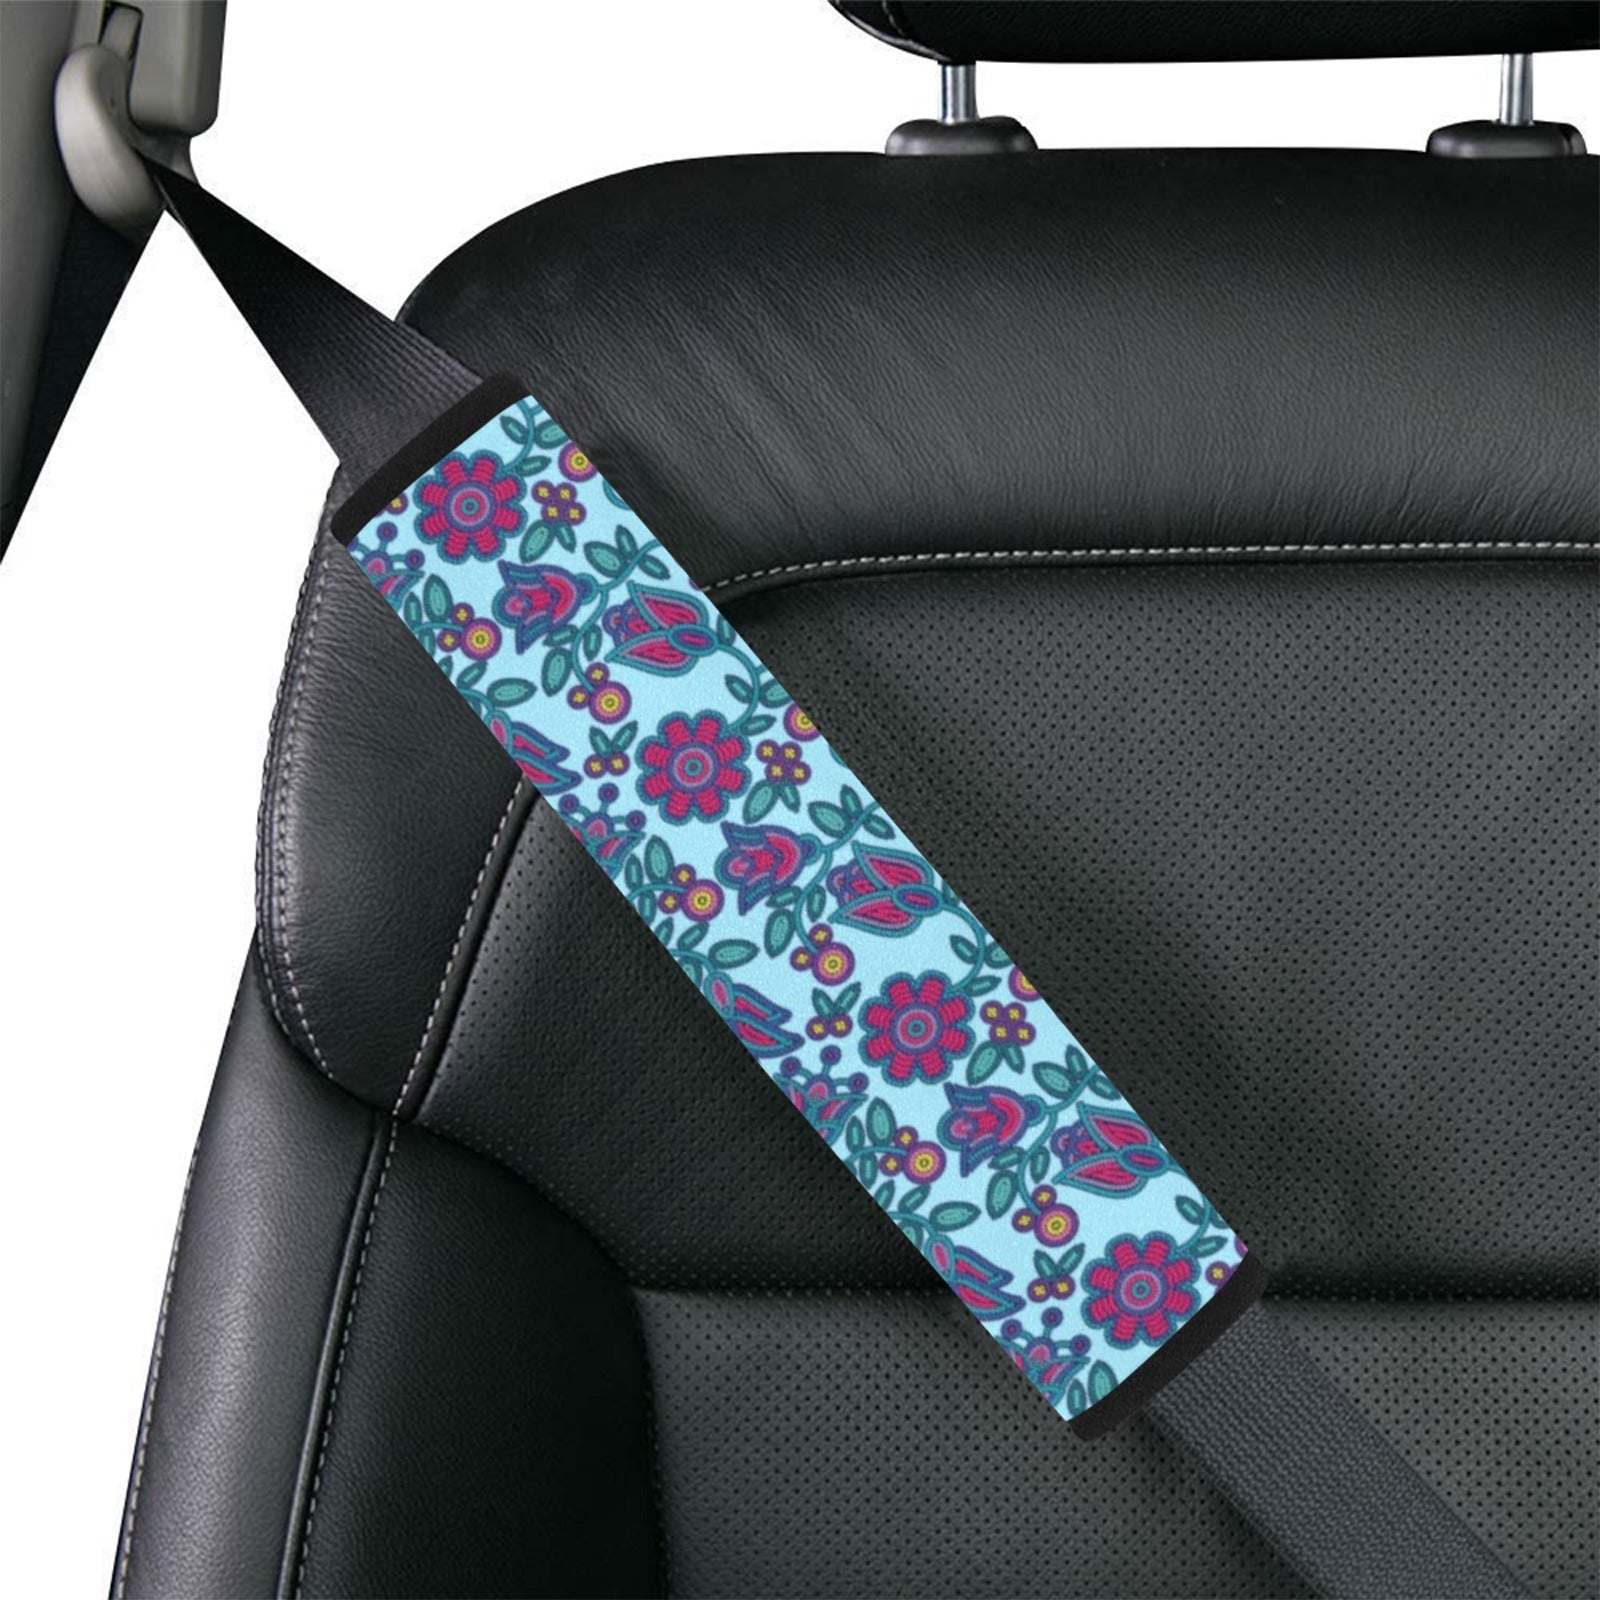 Beaded Nouveau Marine Car Seat Belt Cover 7''x12.6'' (Pack of 2)